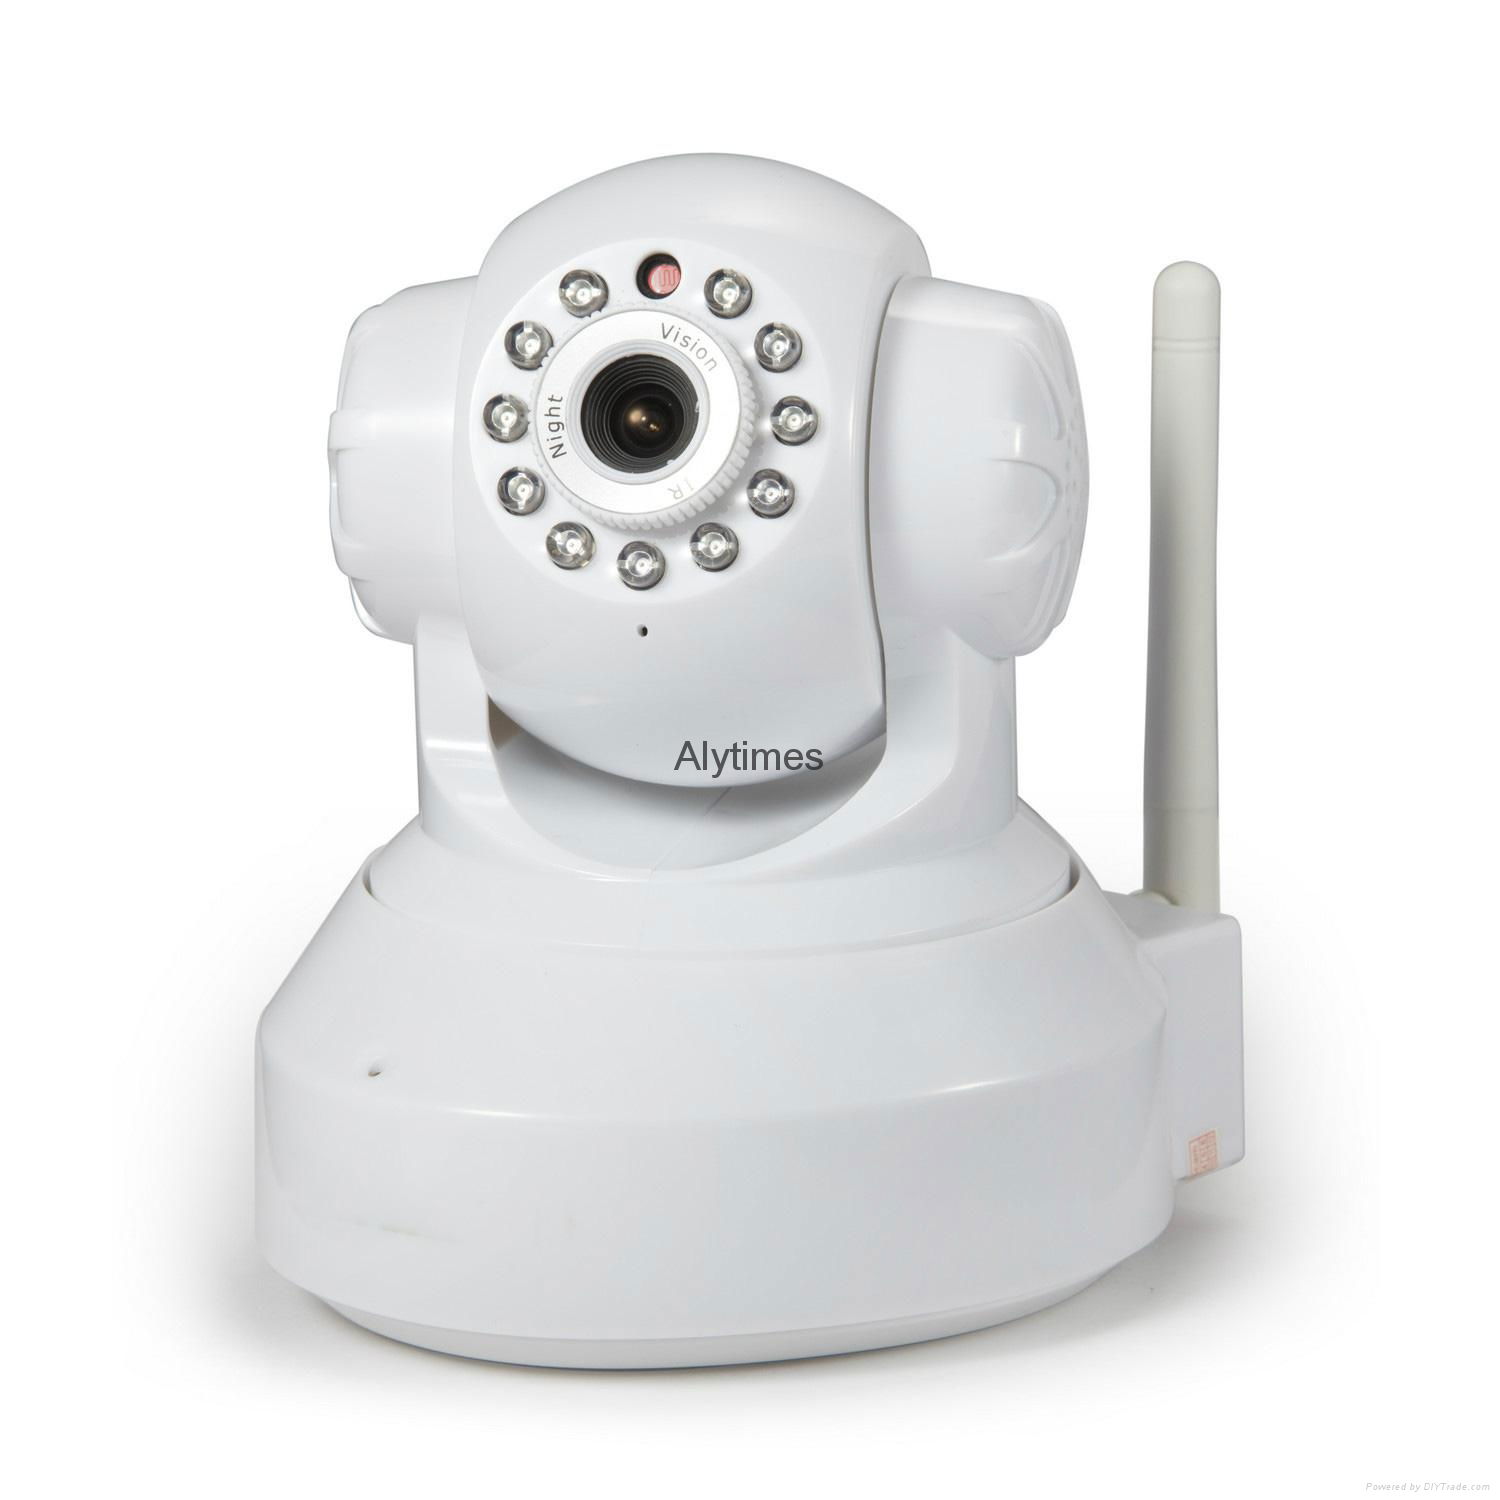 Alytimes Aly002 HD indoor pt wifi network sd card 720p cute ip cam 4